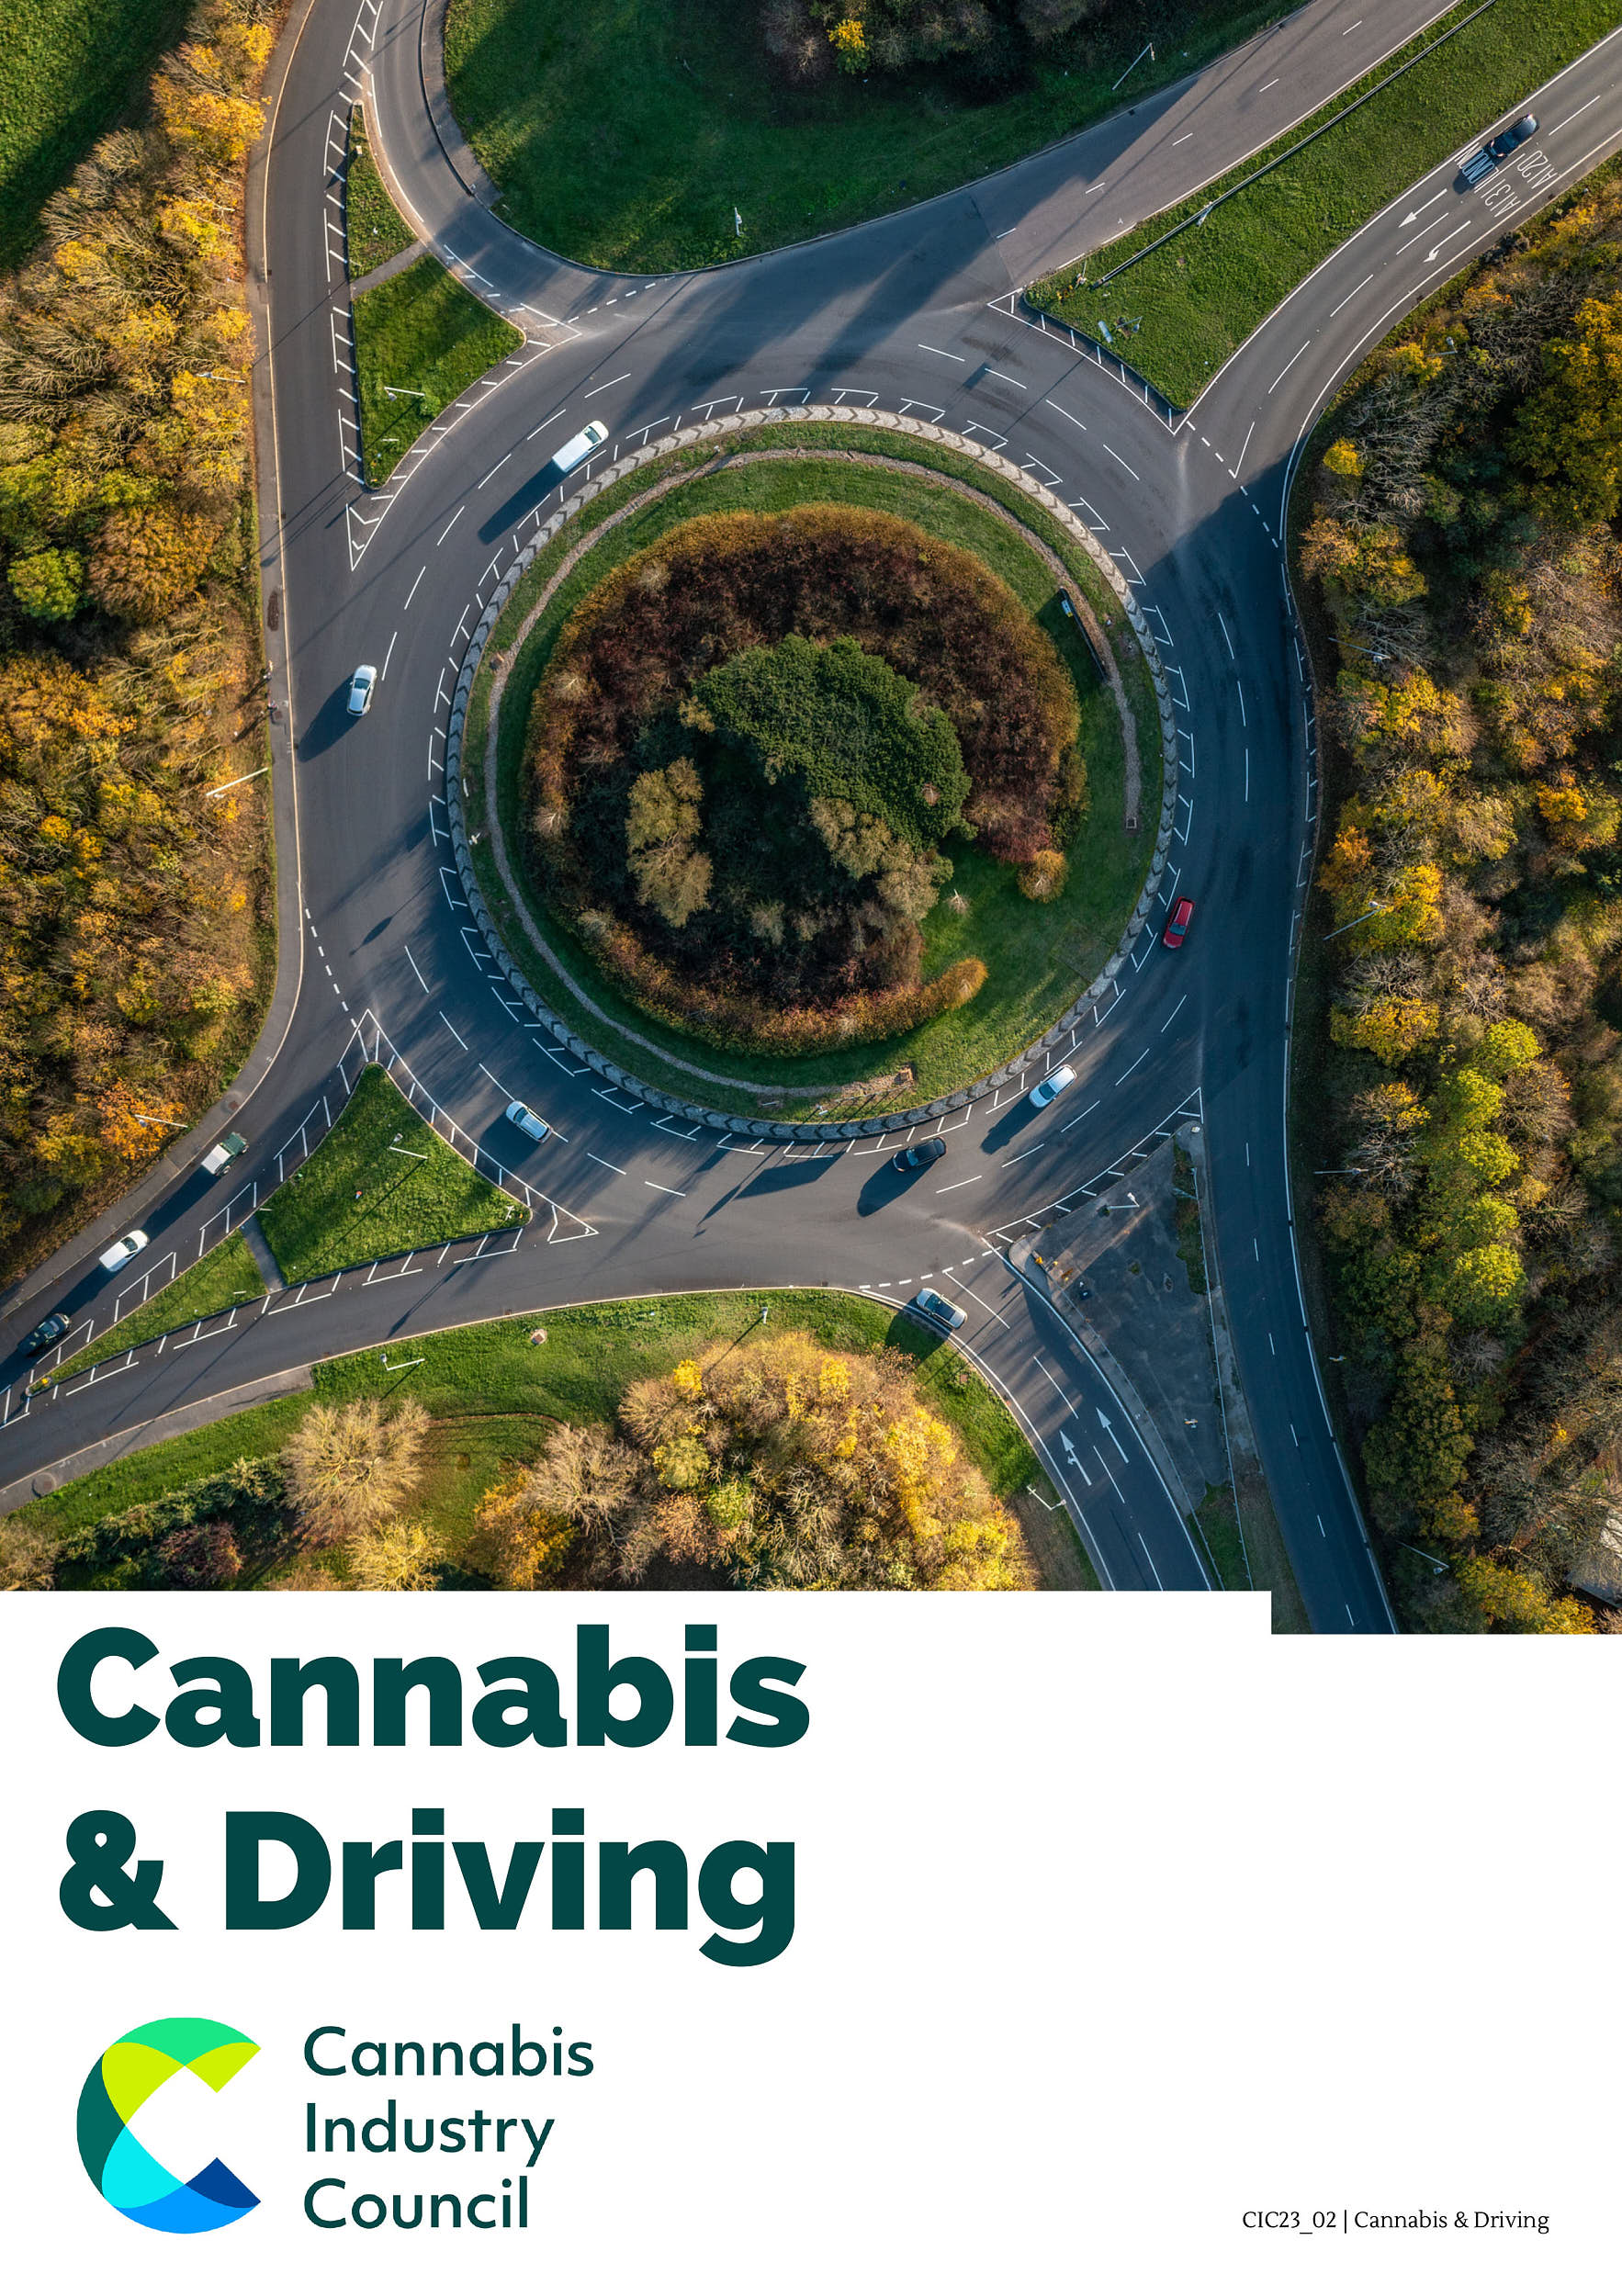 The cover image for an article; showing the article name 'Cannabis & Driving' with a photo of a birdseye view of a roundabout surrounded by lush greenery.